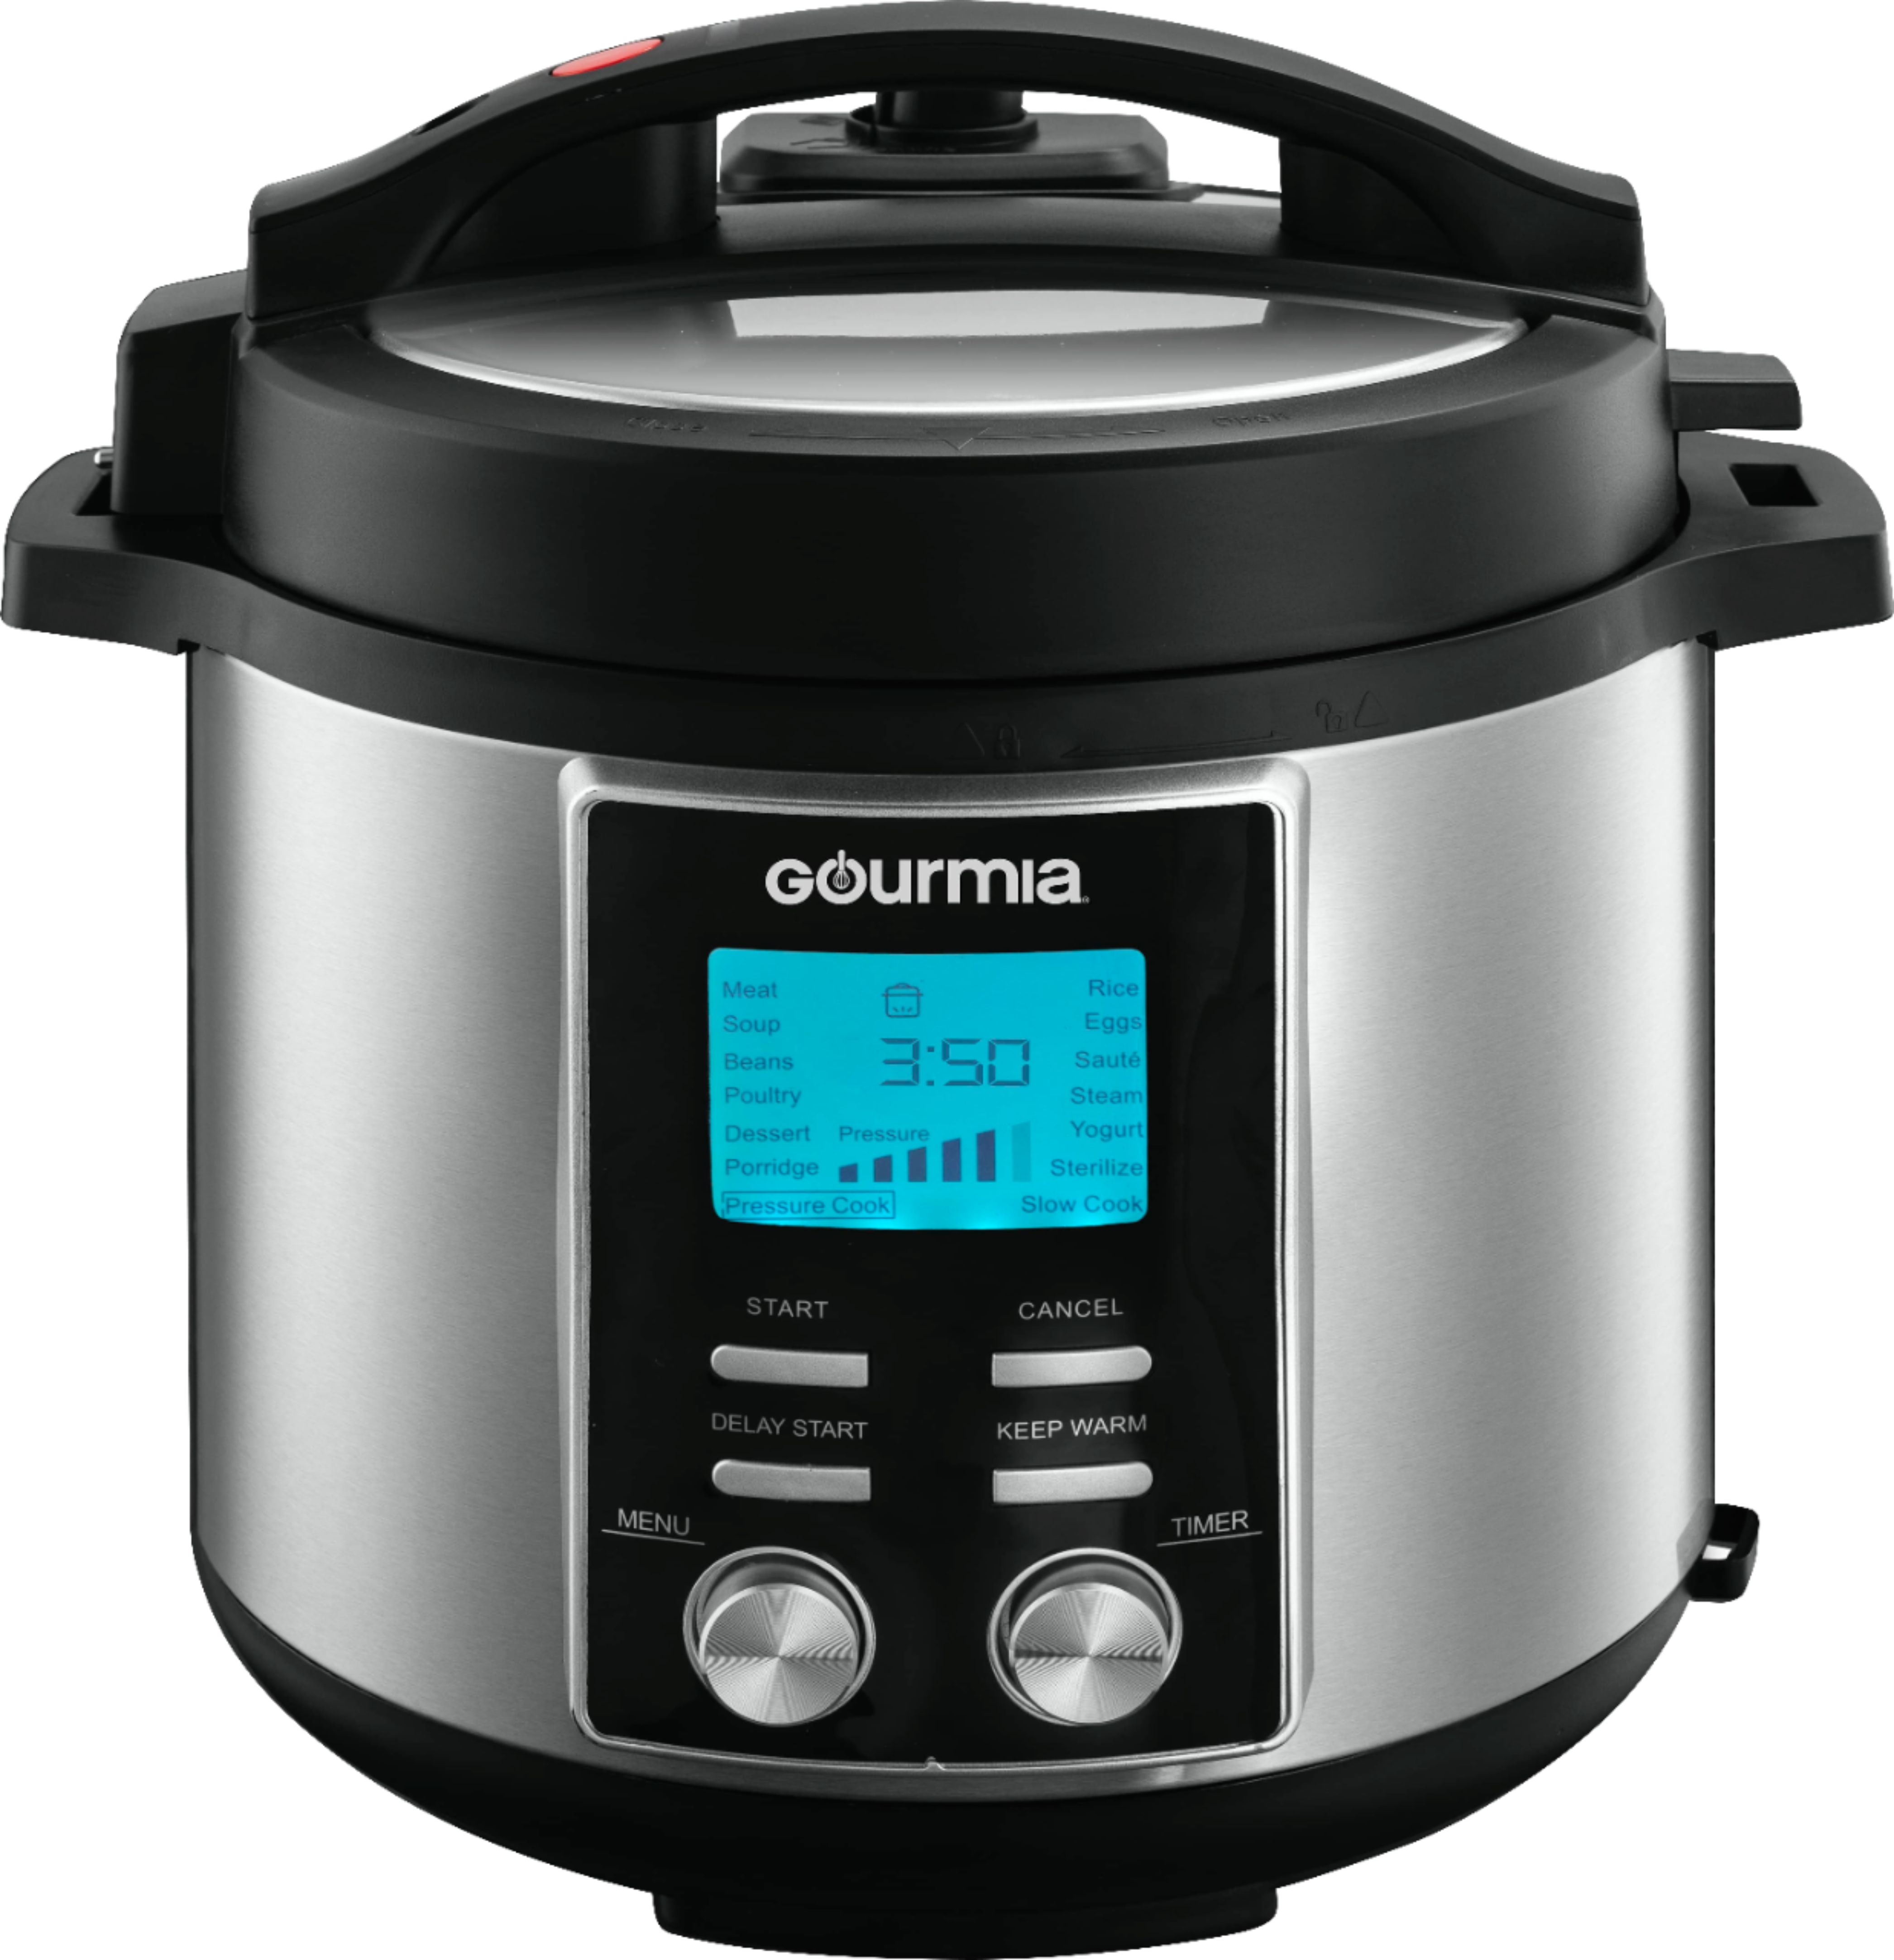 Gourmia 6qt Digital Pressure Cooker Stainless Steel GPC655 - Best Buy